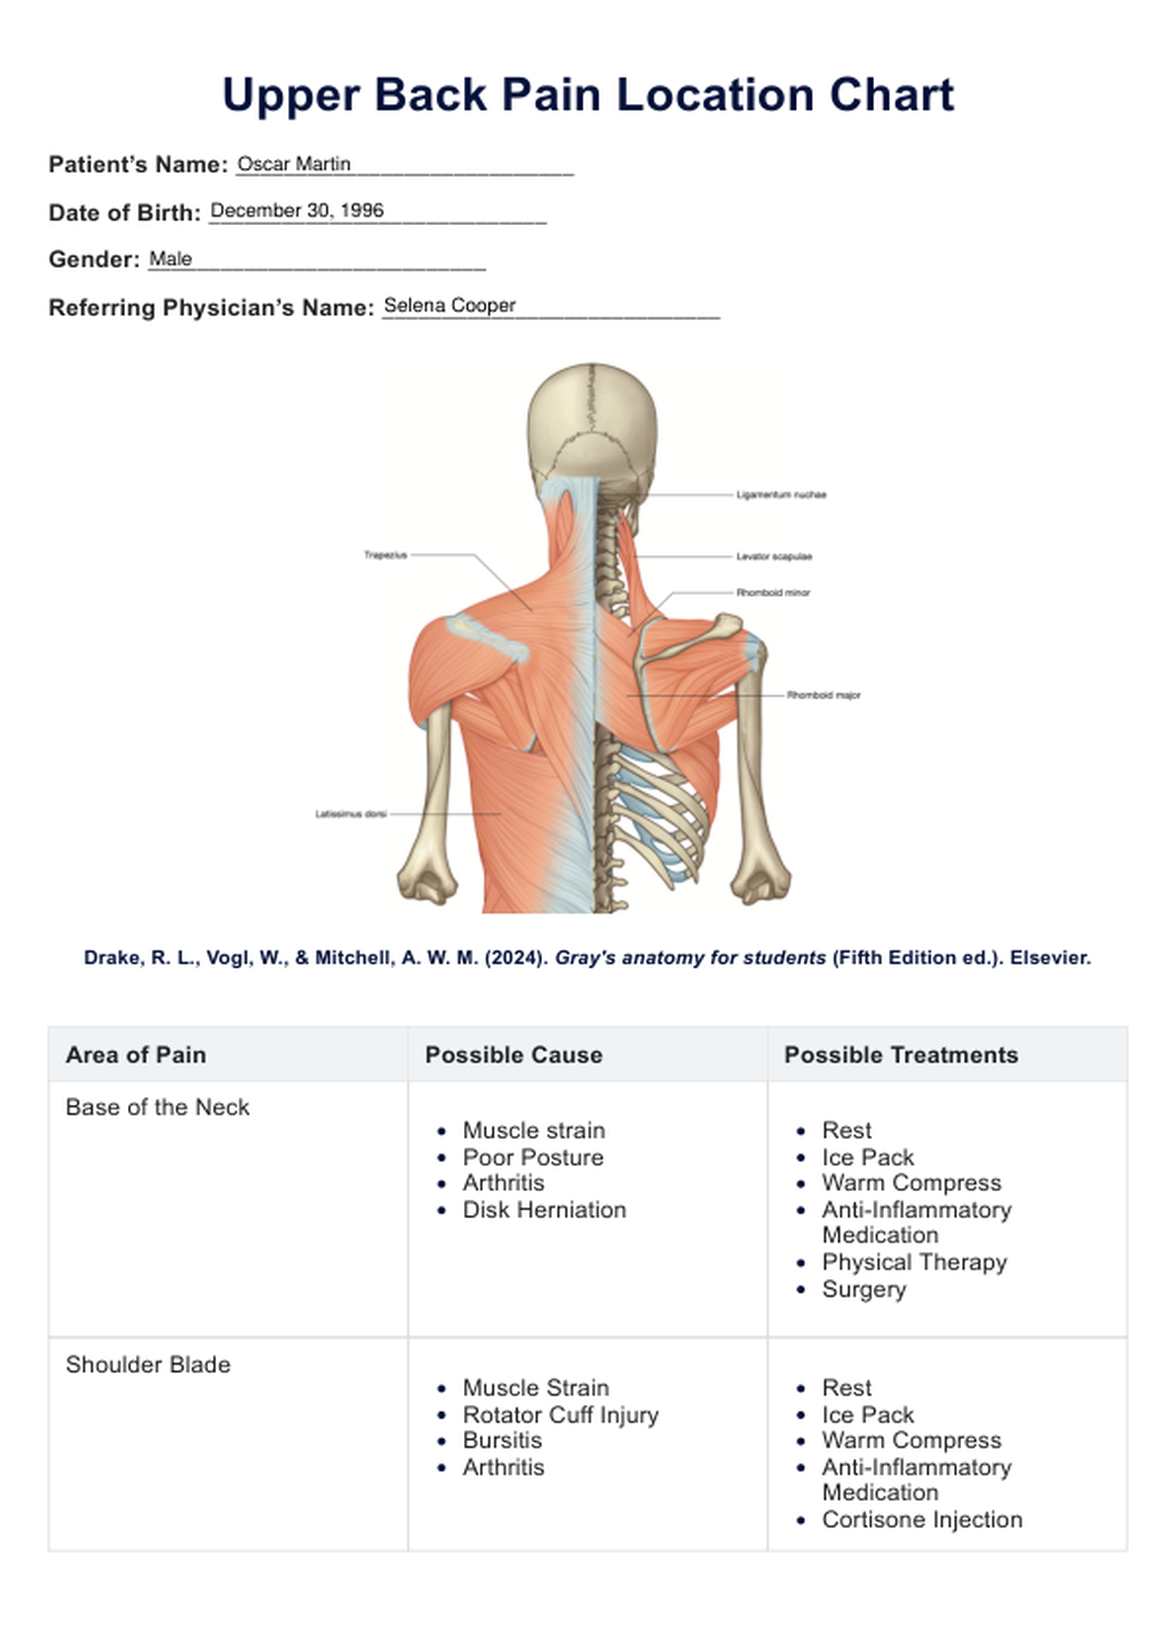 Upper Back Pain Location Chart PDF Example